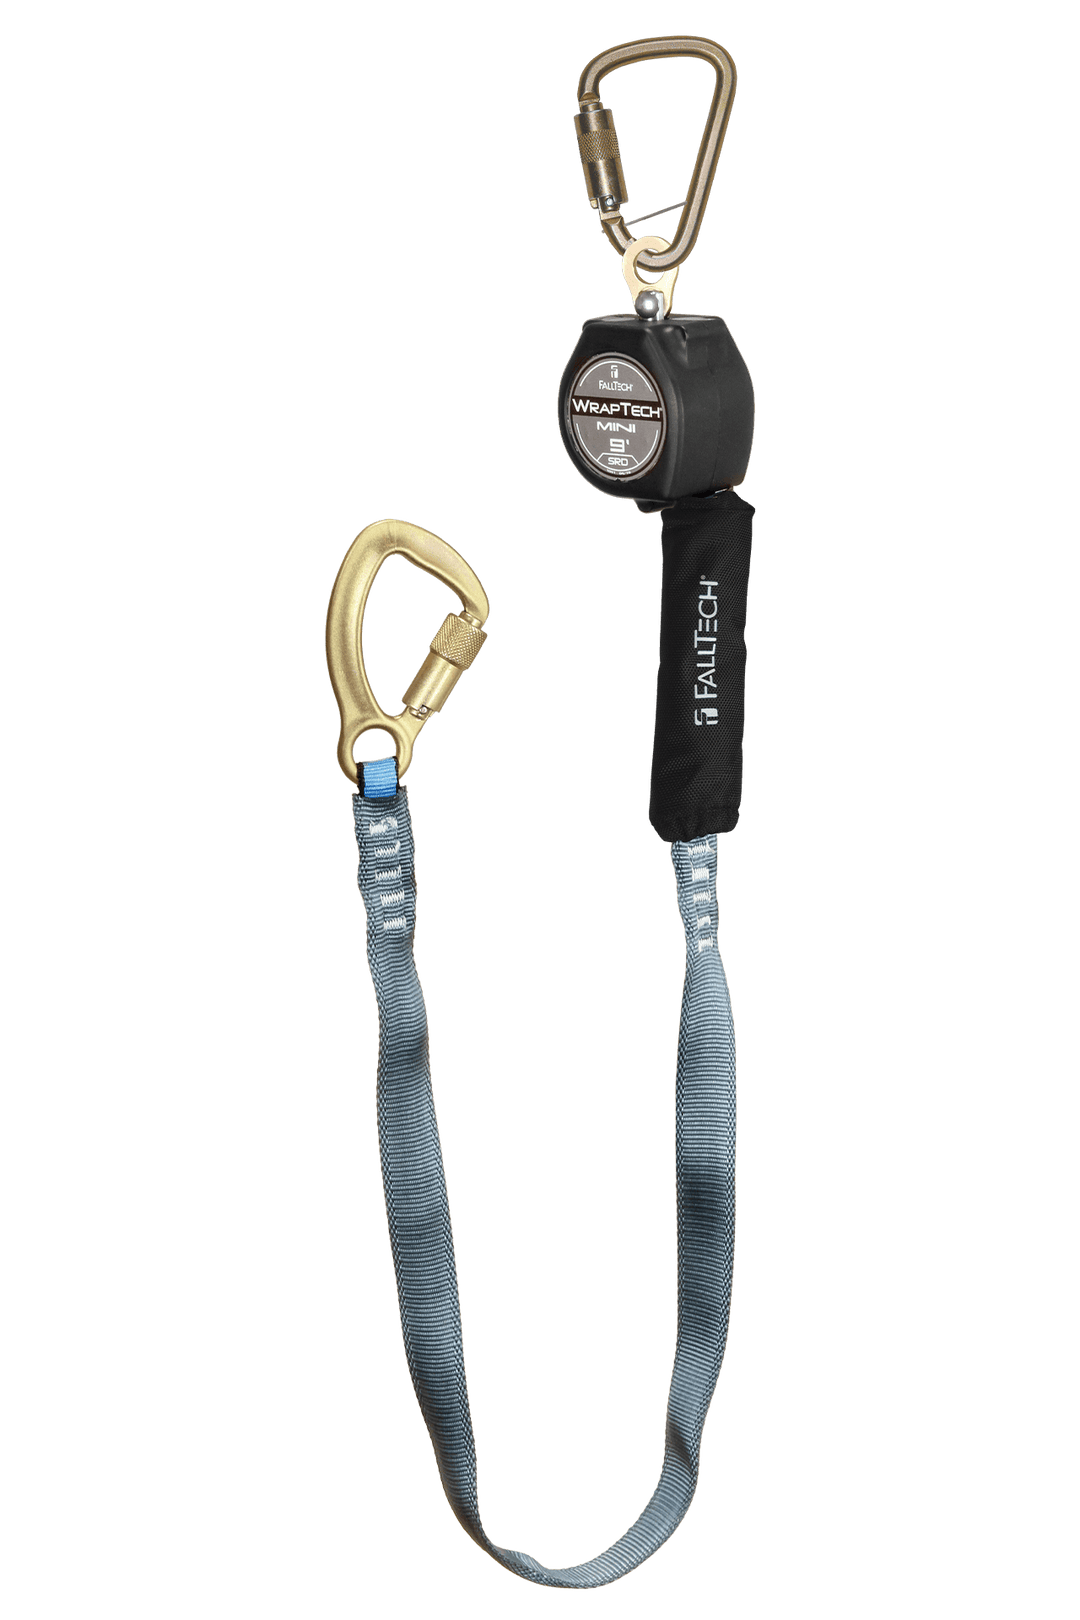 FALLTECH 9' WRAPTECH® Mini Personal SRL w/ Steel 5K Carabiner, Includes Steel Dorsal Connecting Carabiner